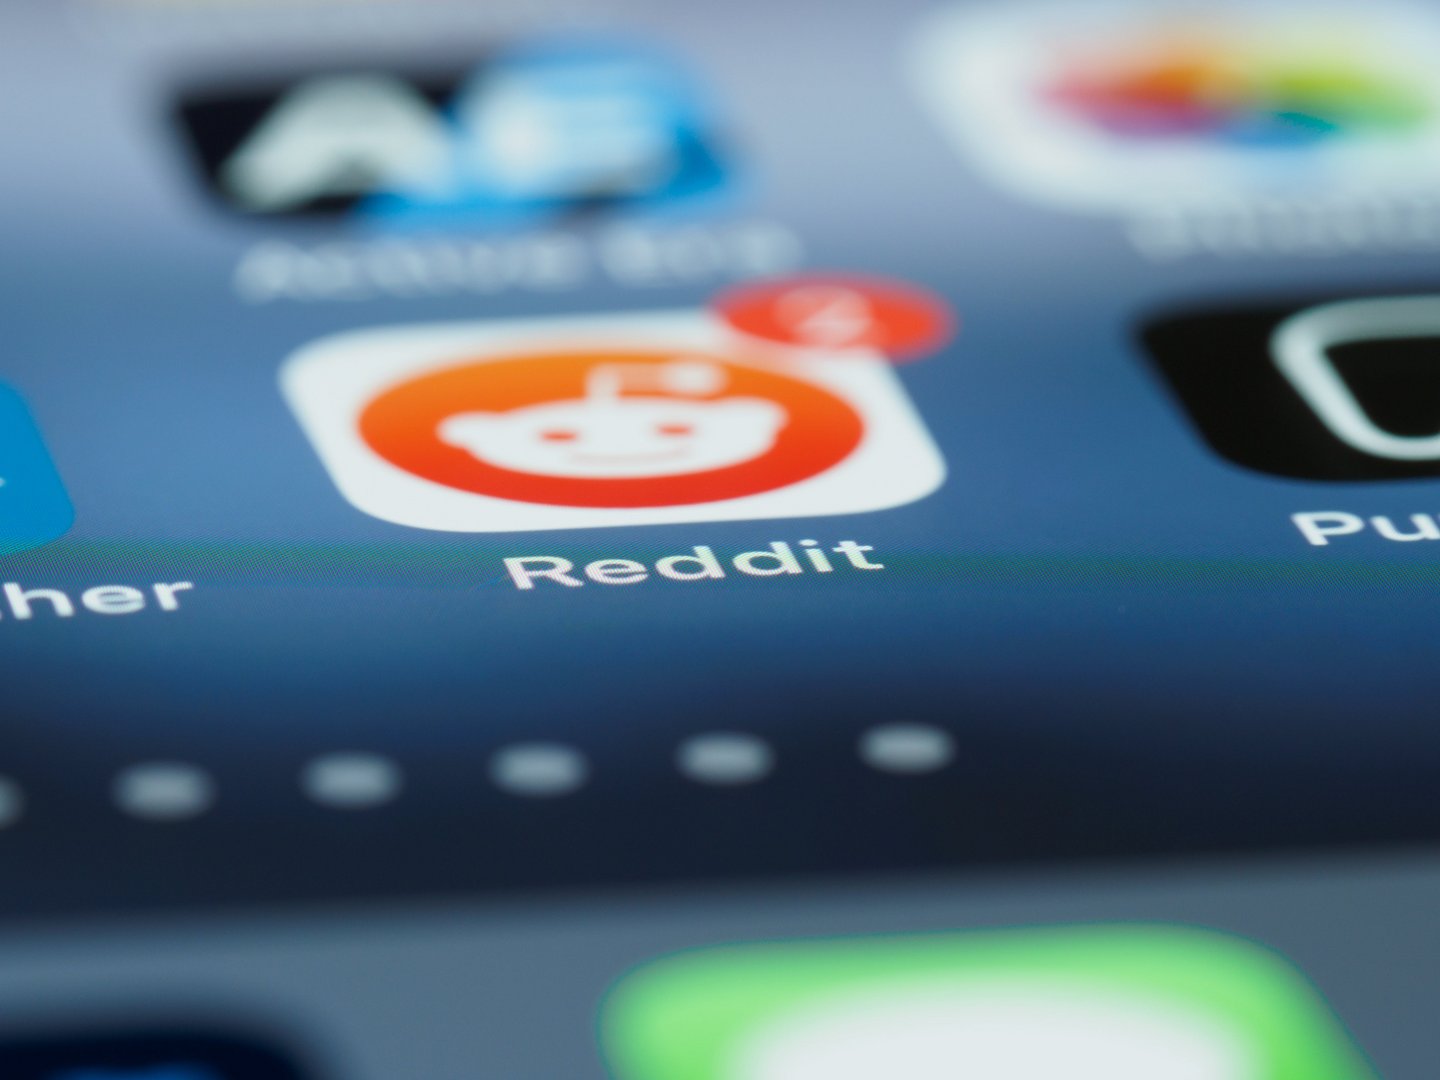 image Reddit&#8217;s IPO as much as five times oversubscribed, according to sources